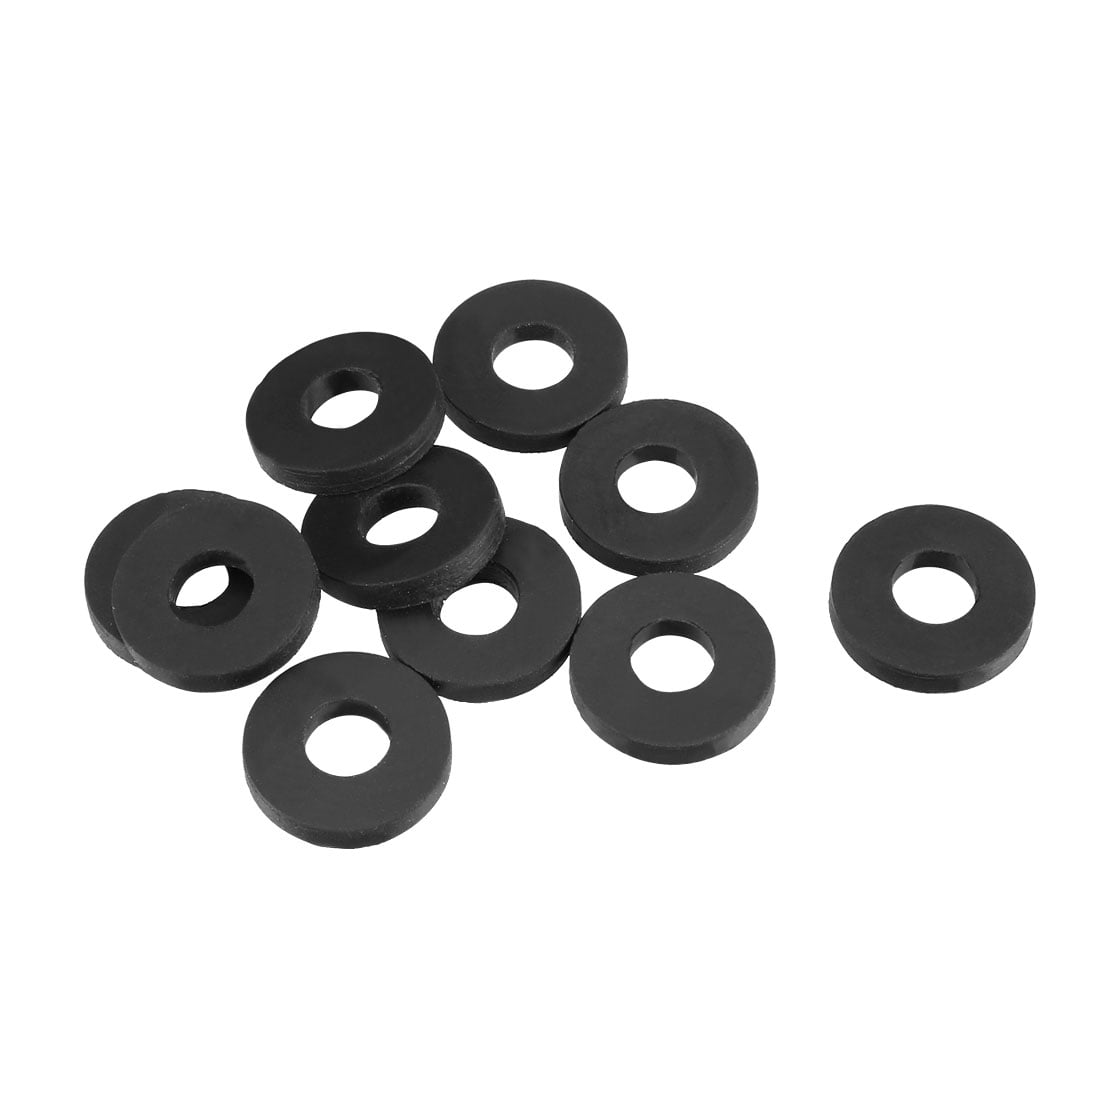 12mm OD O-Ring O-Ring Flat Rubber Washer Lot for Eyelet tap 100 Pieces